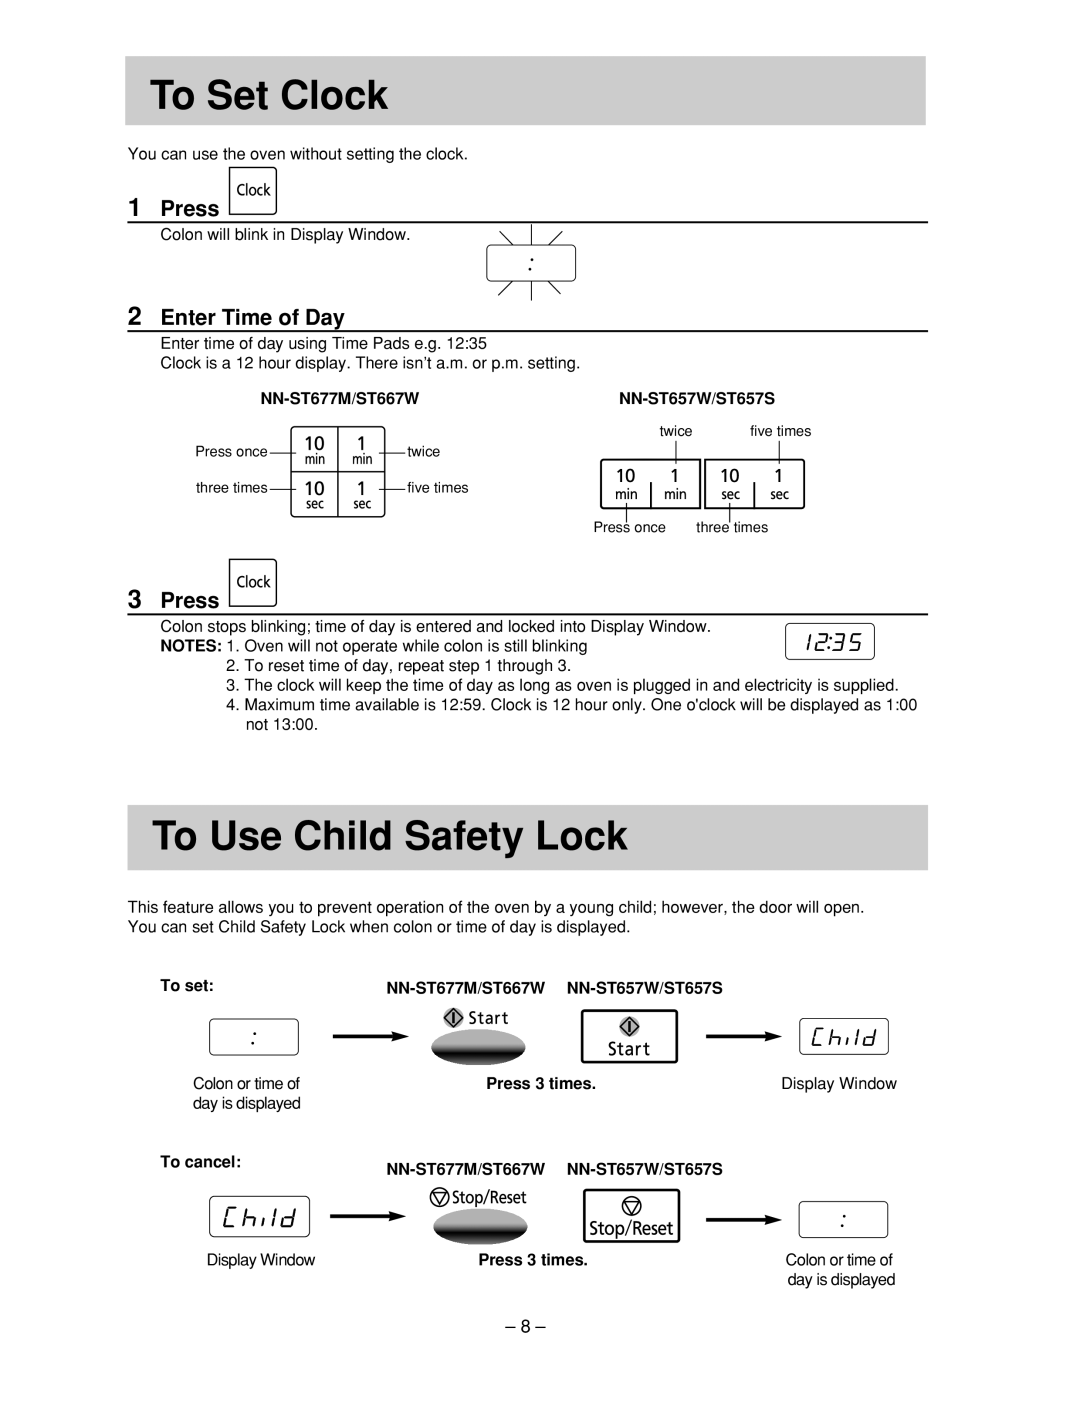 Panasonic NN-ST657 W, NN-ST677M, NN-ST667W To Set Clock, To Use Child Safety Lock, 1Press, 2Enter Time of Day, 3Press, 8 